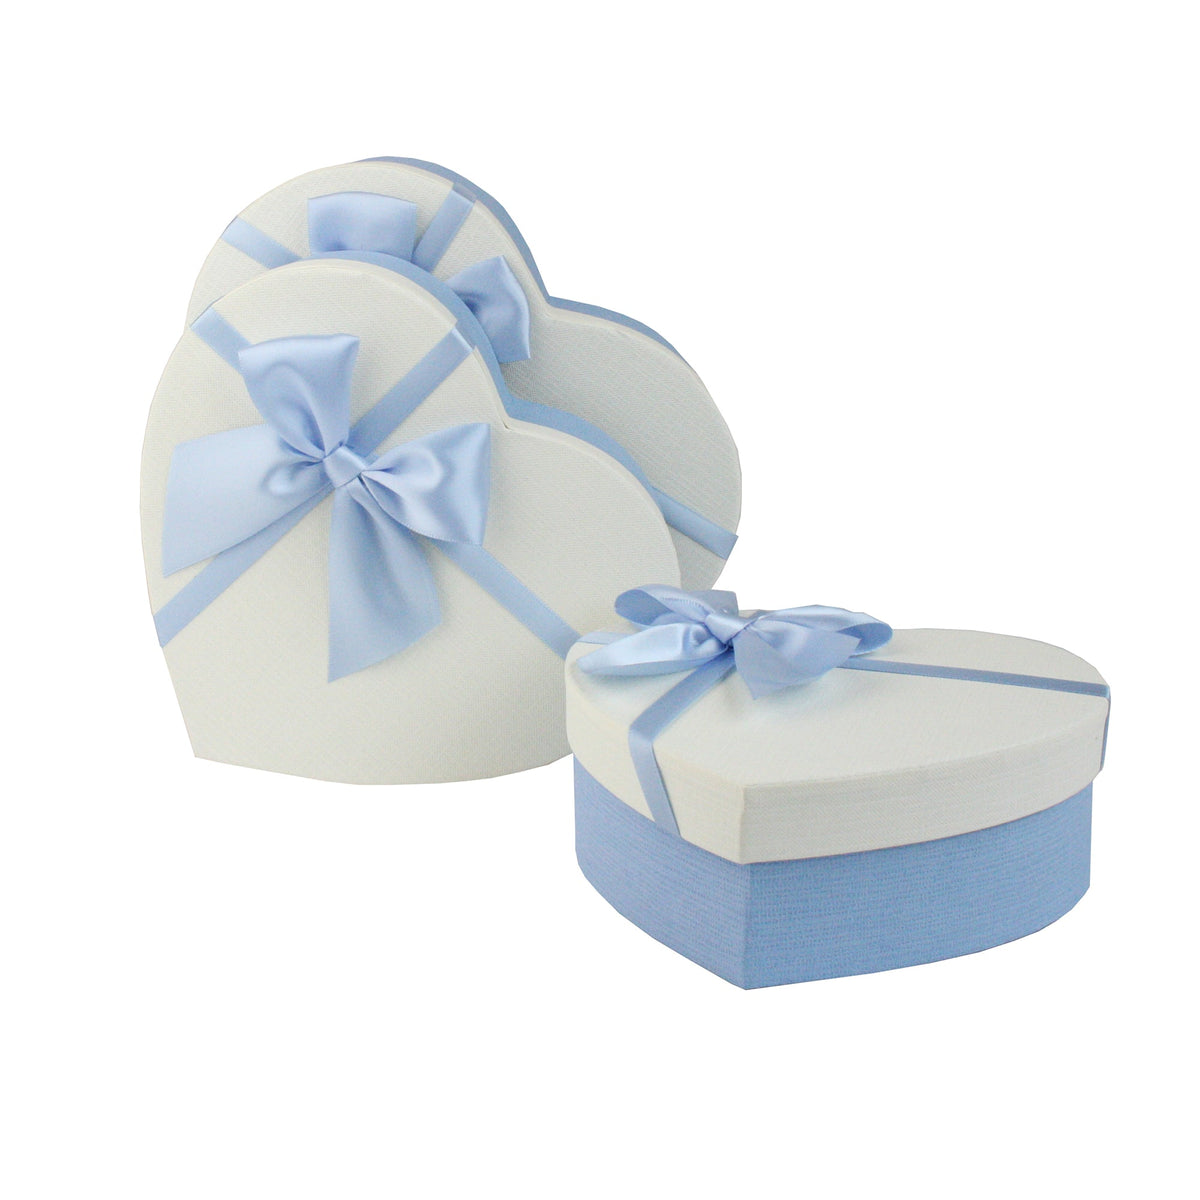 Set of 3 Heart Blue Gift Boxes With Blue Satin Ribbon